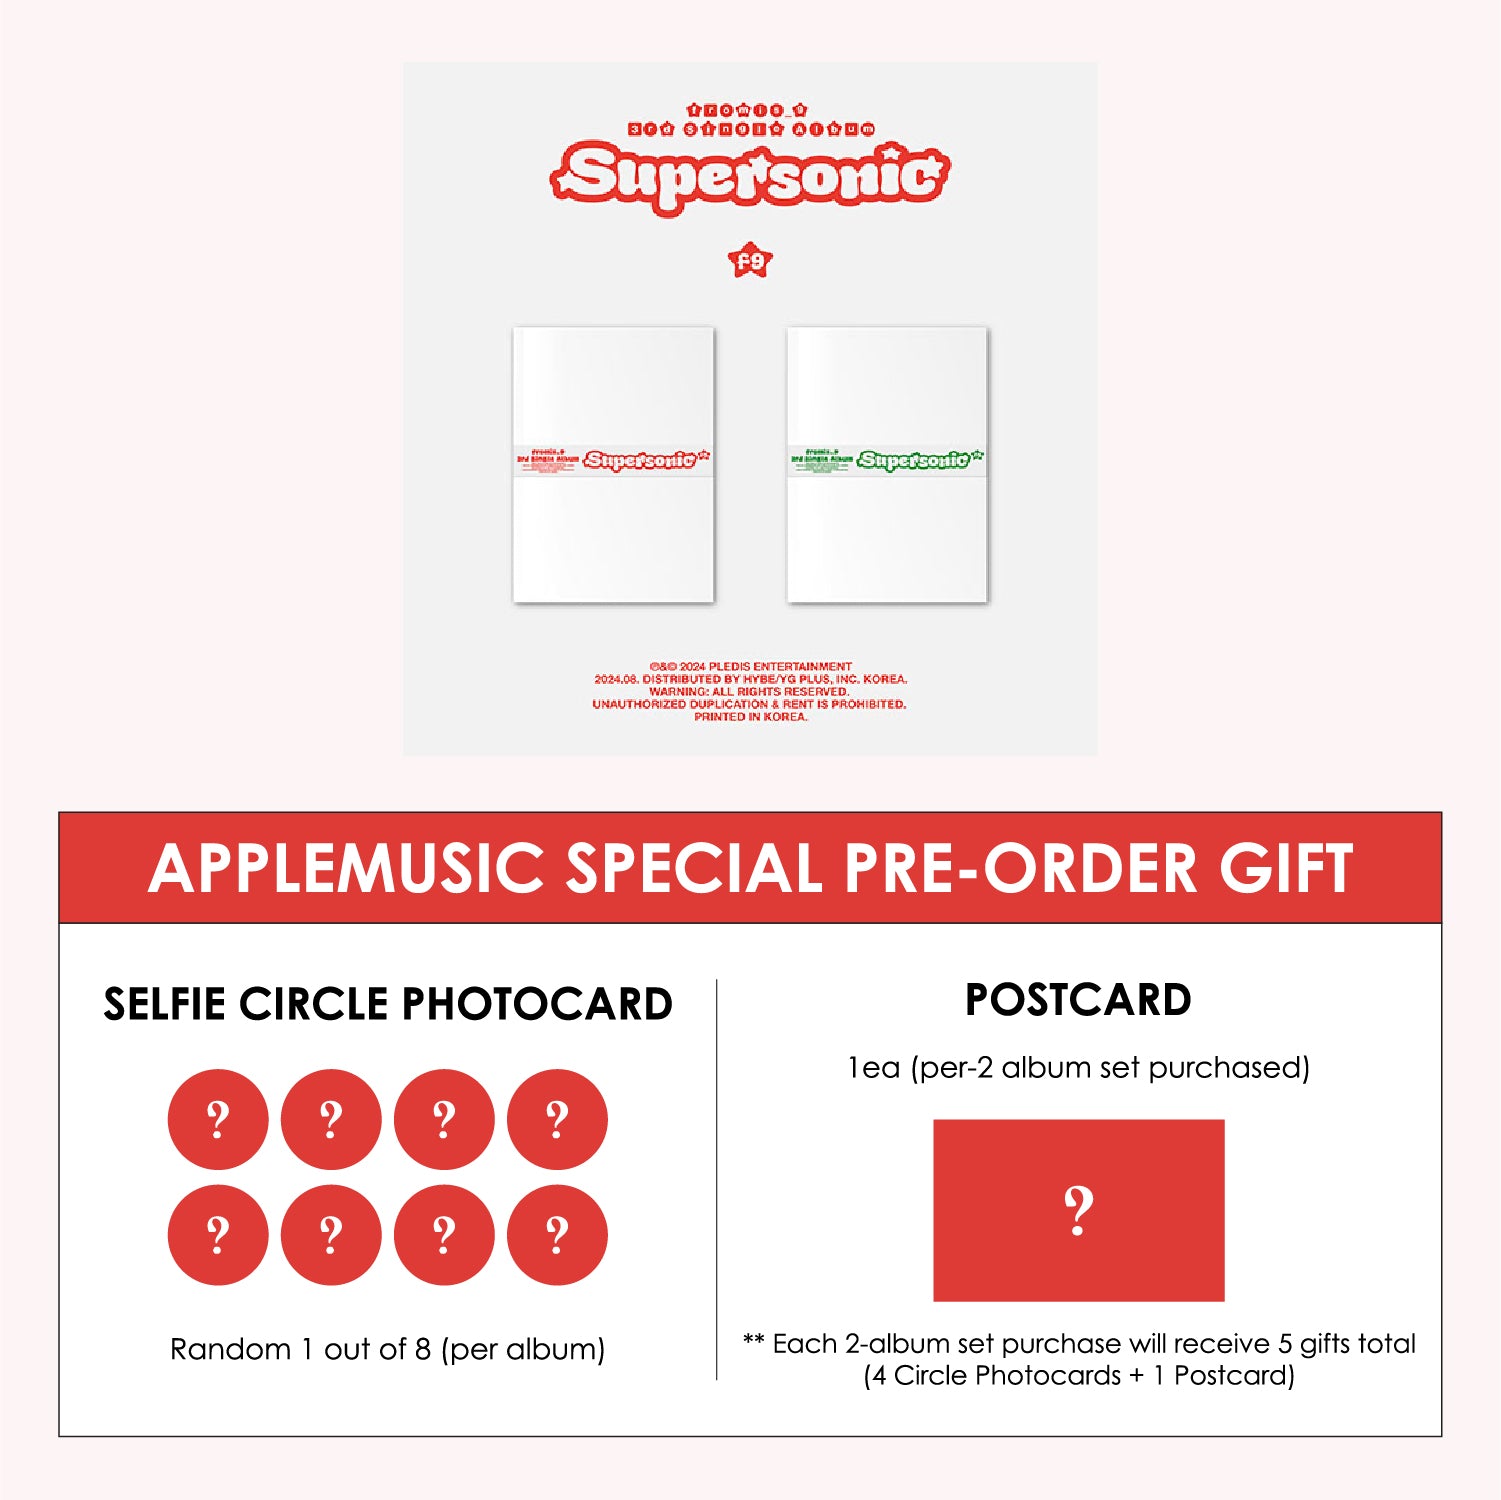 FROMIS_9 3RD SINGLE ALBUM - SUPERSONIC + APPLEMUSIC PHOTOCARD (PRE-ORDER)